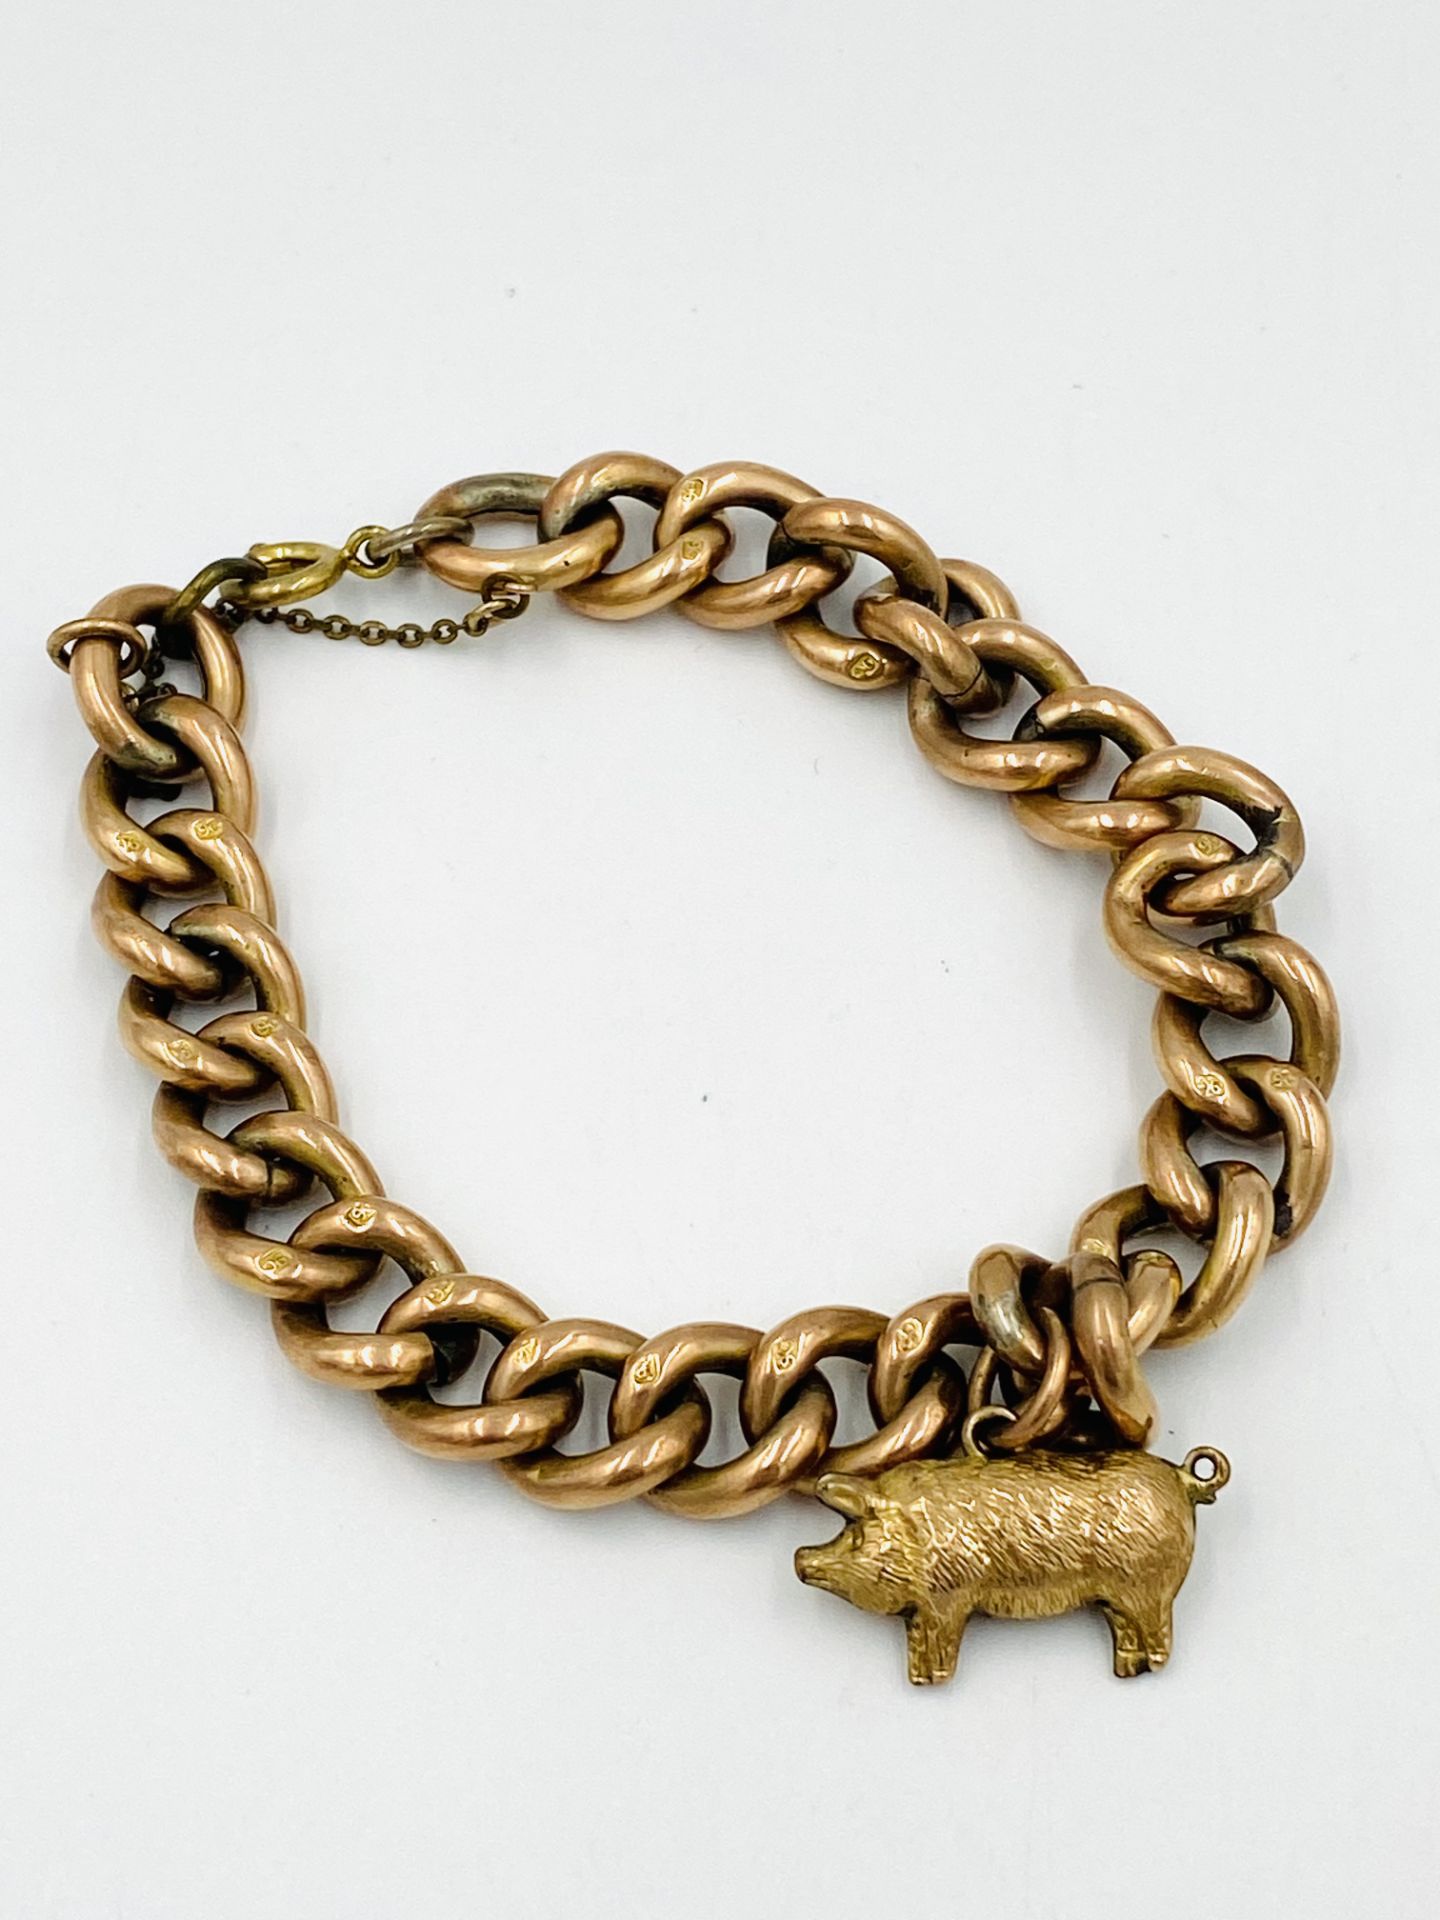 9ct gold bracelet with pig charm